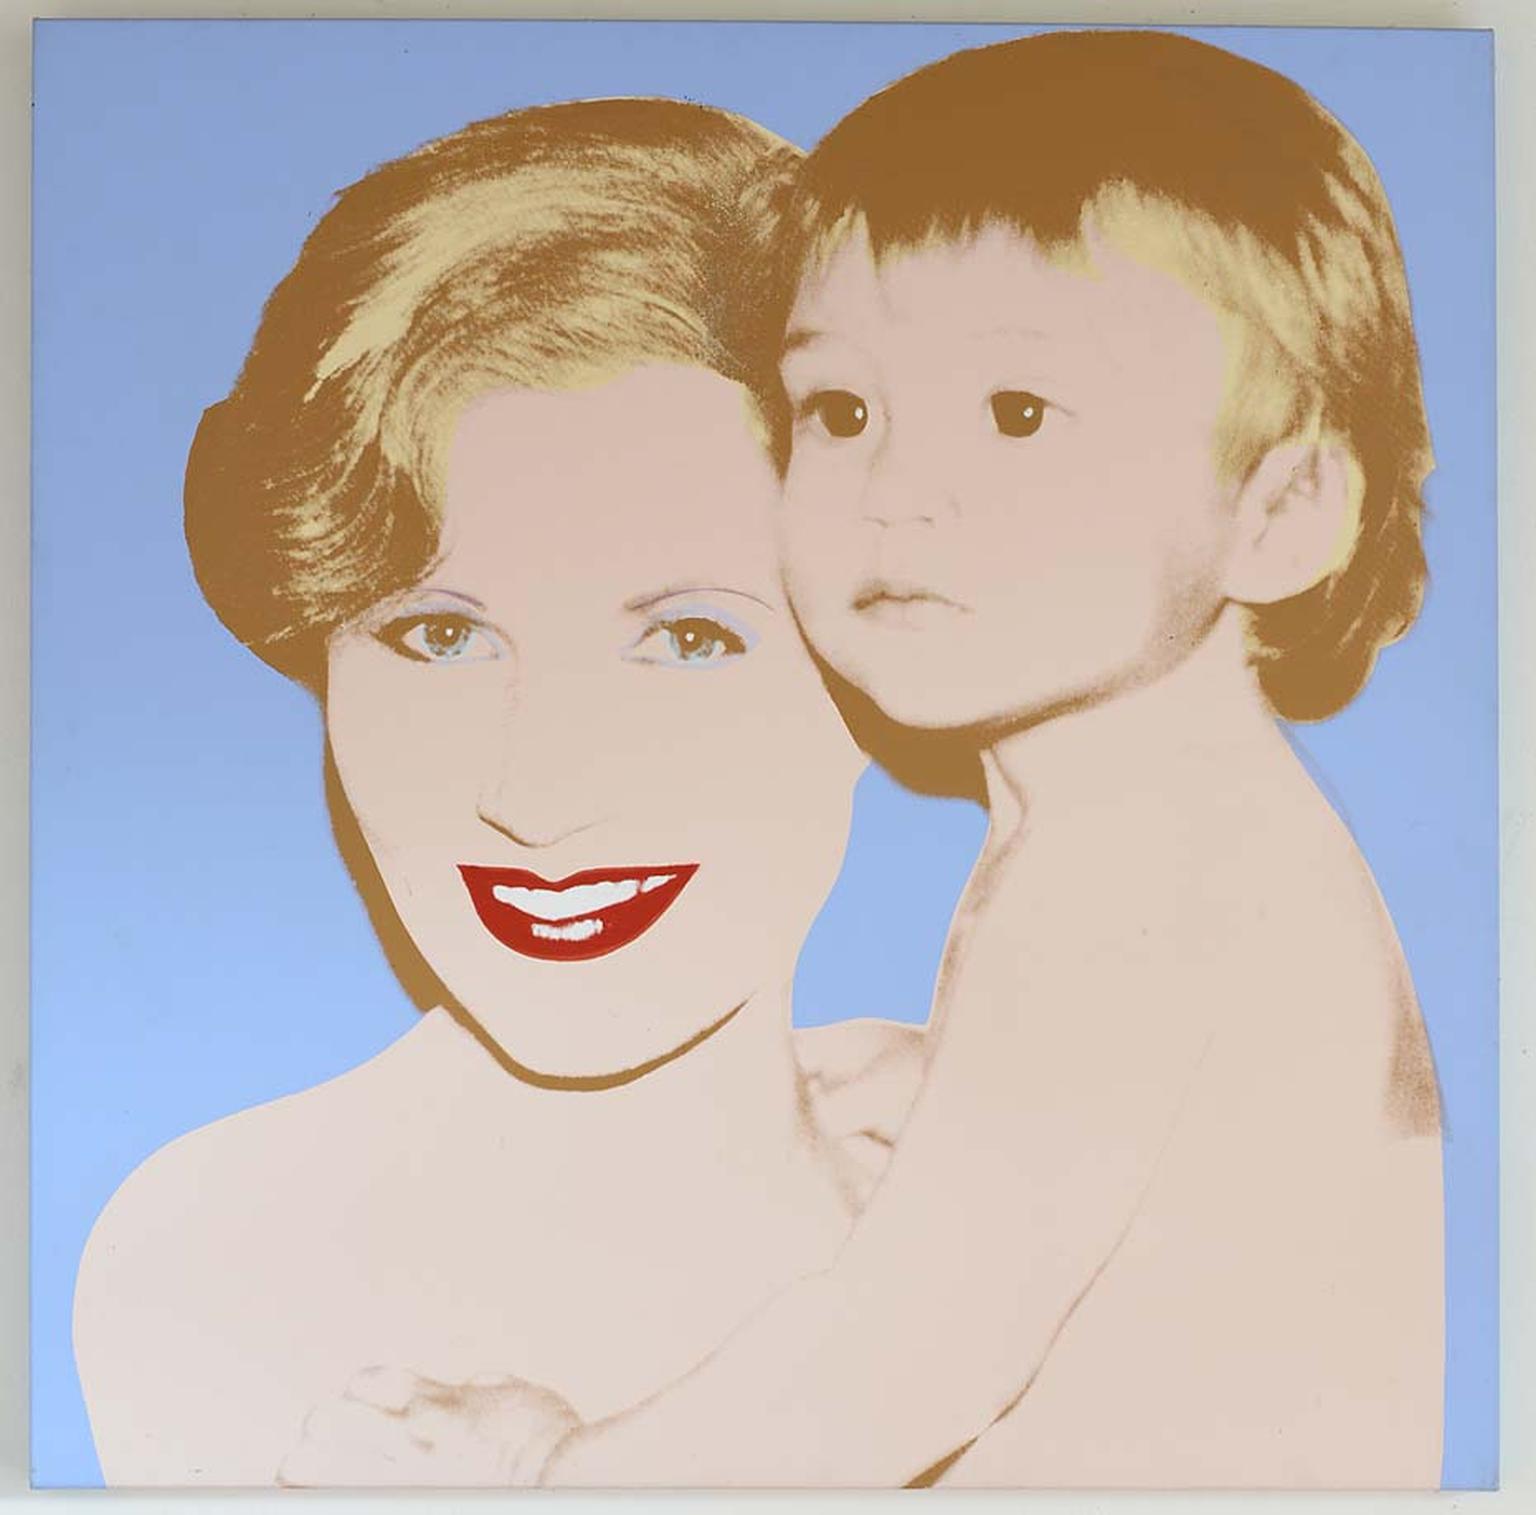 Andy Warhol was a friend of Syz and a major influence on her creations. Pictured is a Warhol painting of Syz and her son.